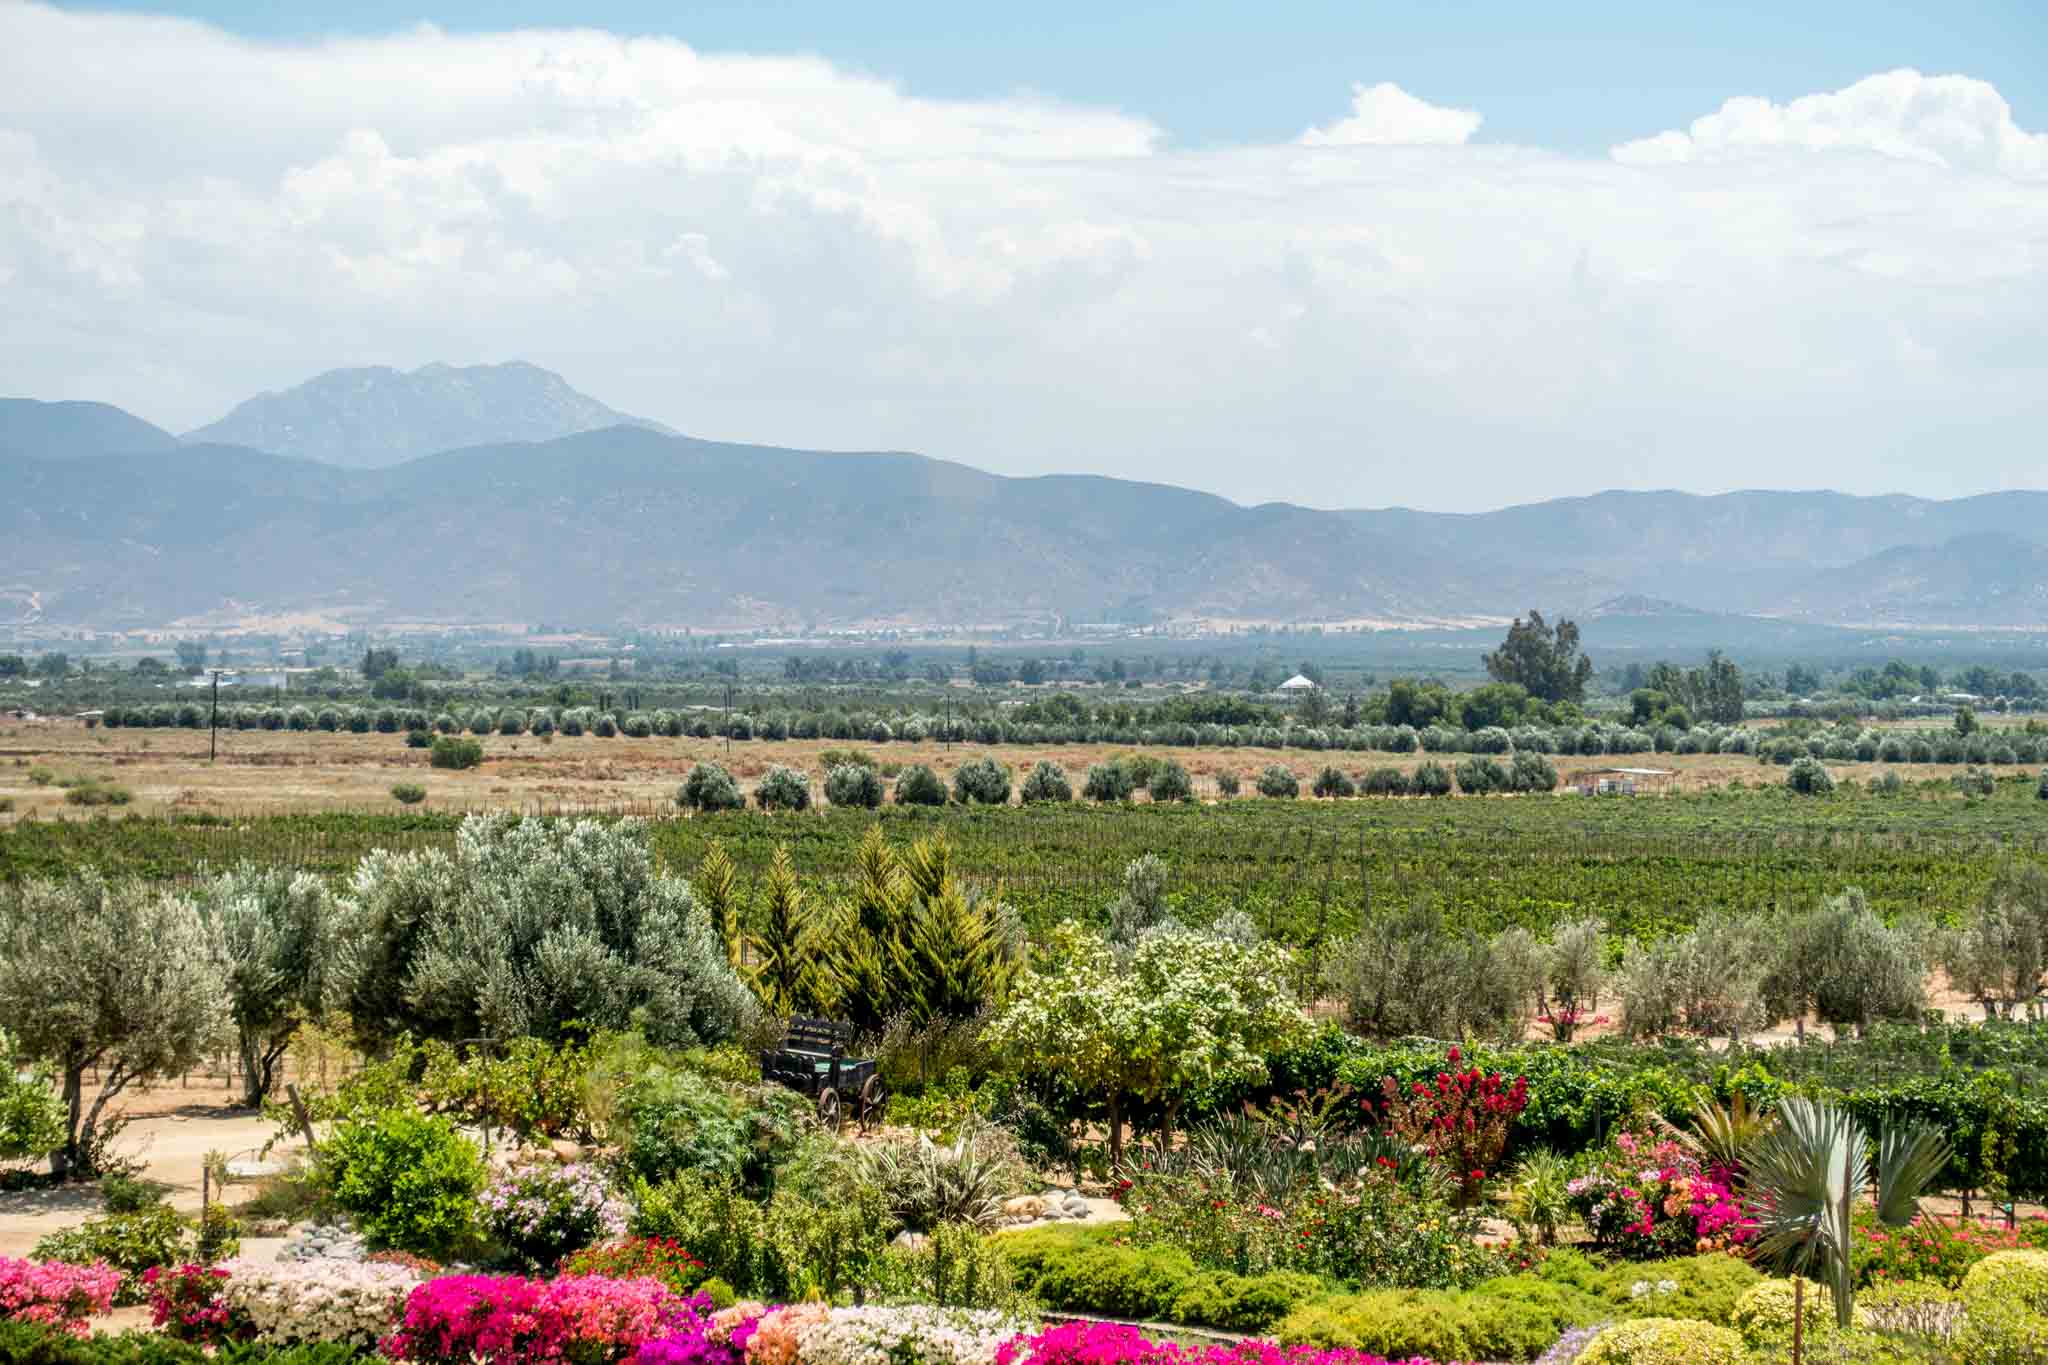 The hills and vineyards of the Valle de Guadalupe of Baja, Mexico